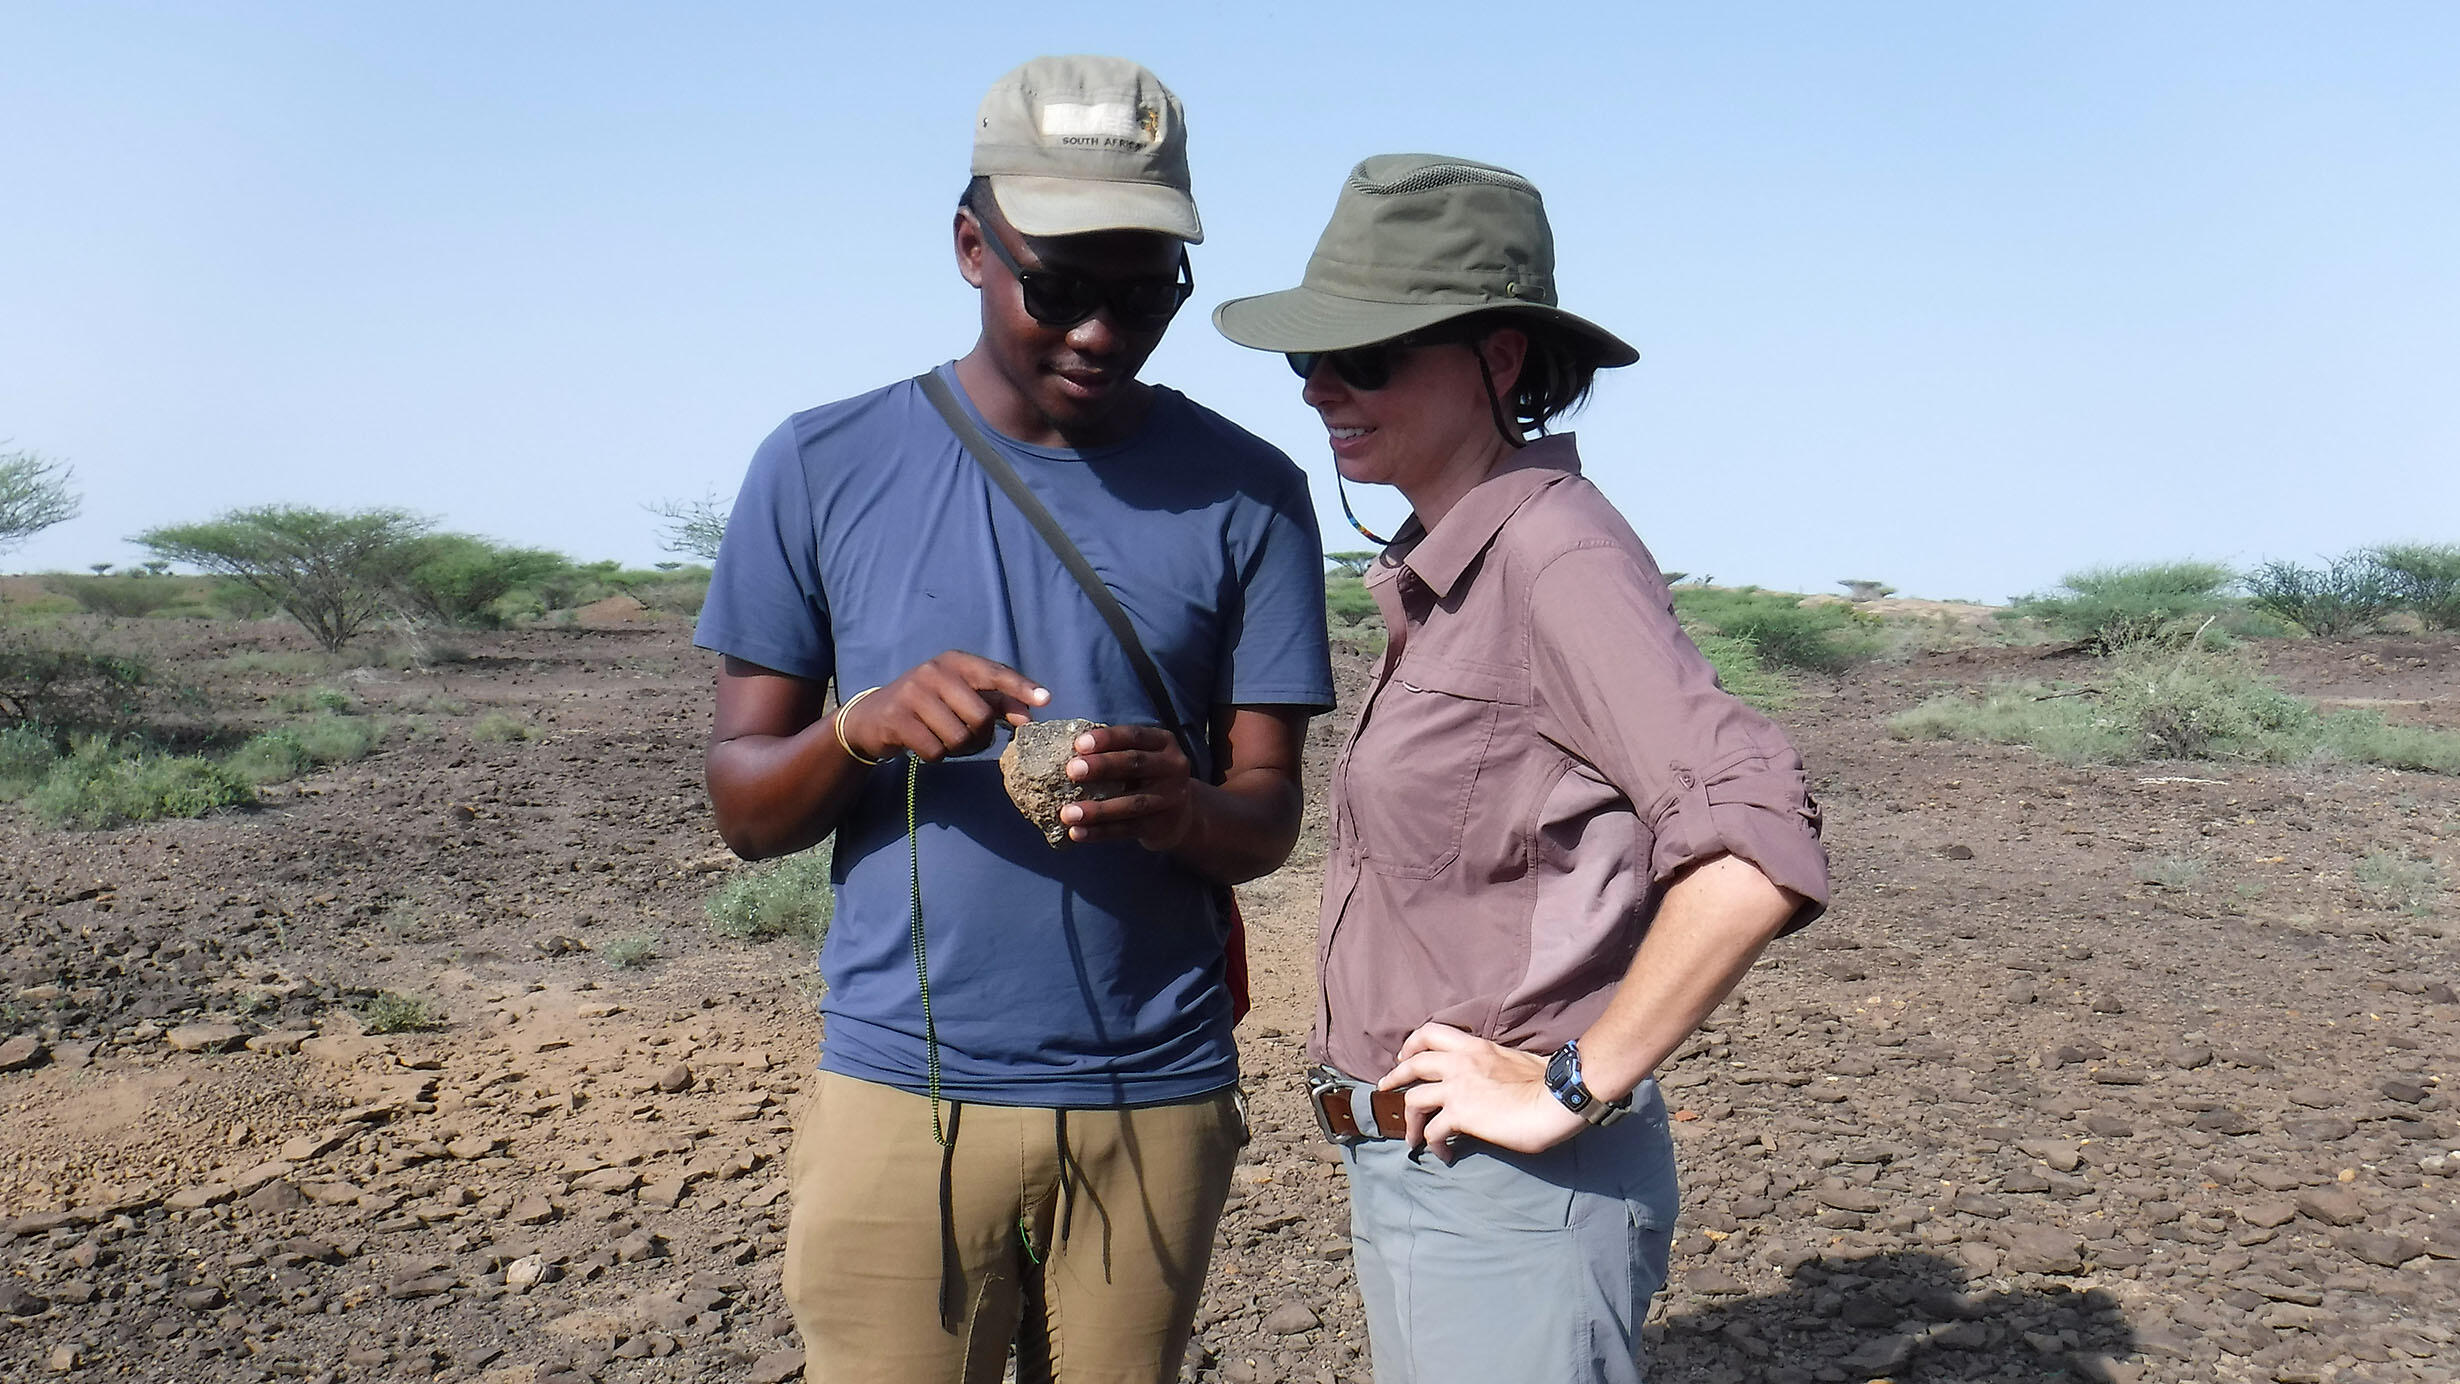 Two scientists in the field examine a specimen together.